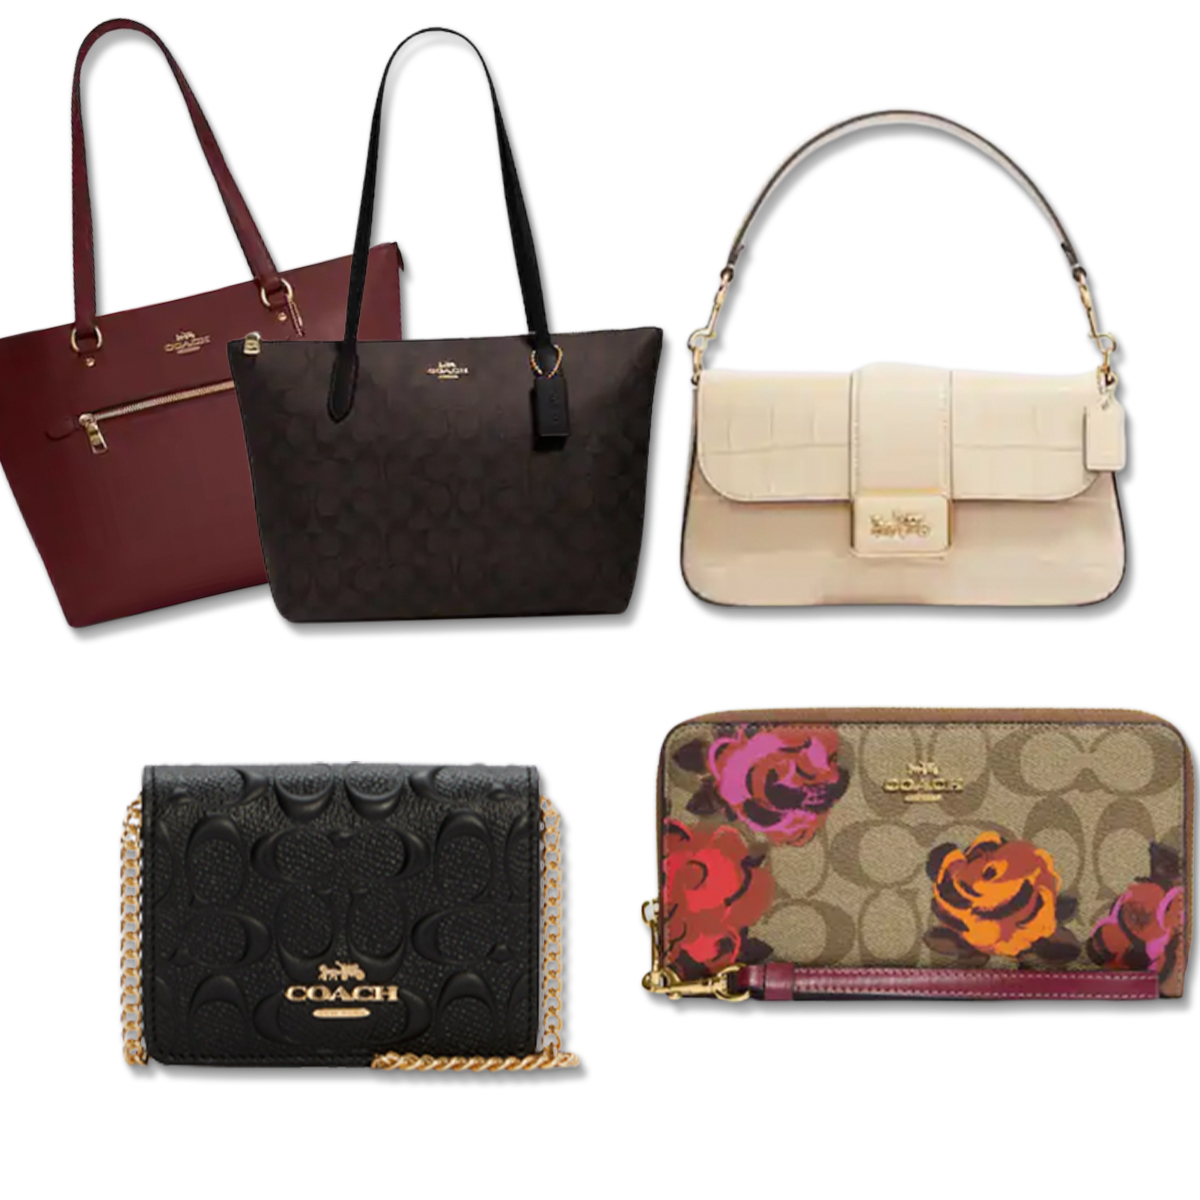 Bag Outlet, Discount Handbags & Travel Accessories